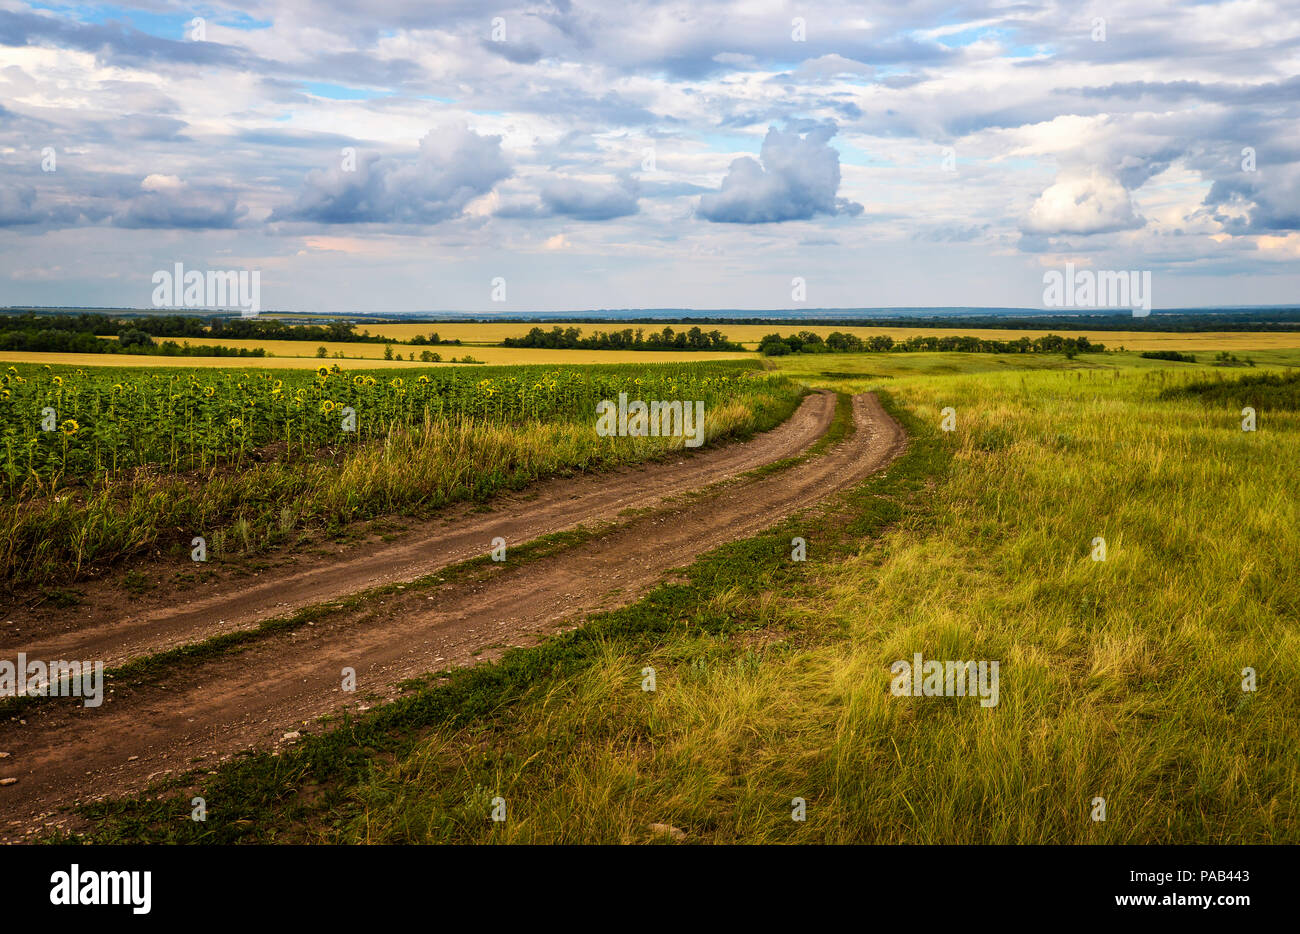 Landscape with country road in autumn fields Stock Photo